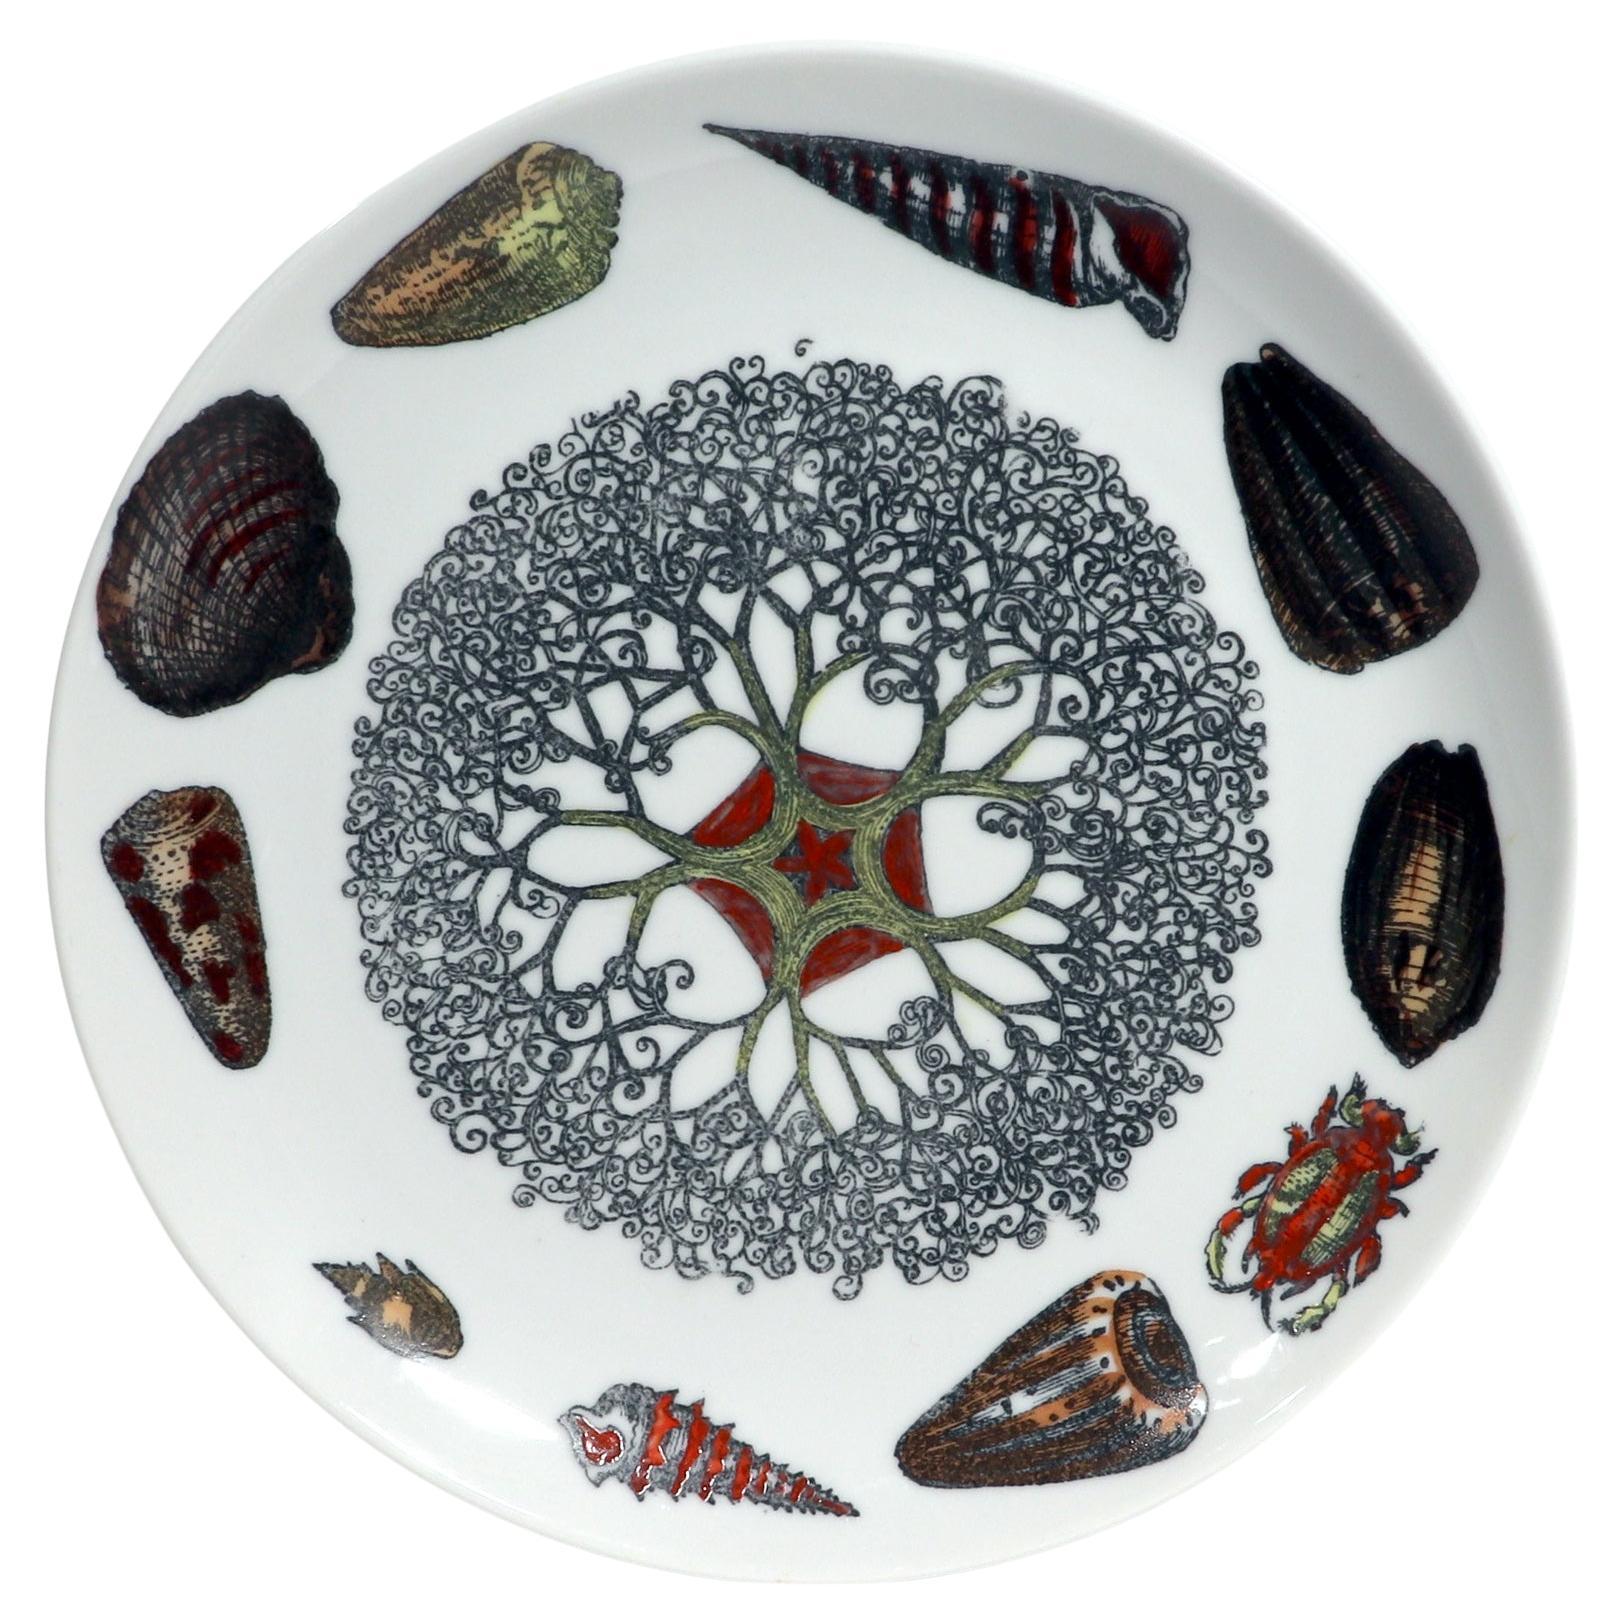 Piero Fornasetti Porcelain Conchiglie Seashell Plate with Mollusks, #9 For Sale